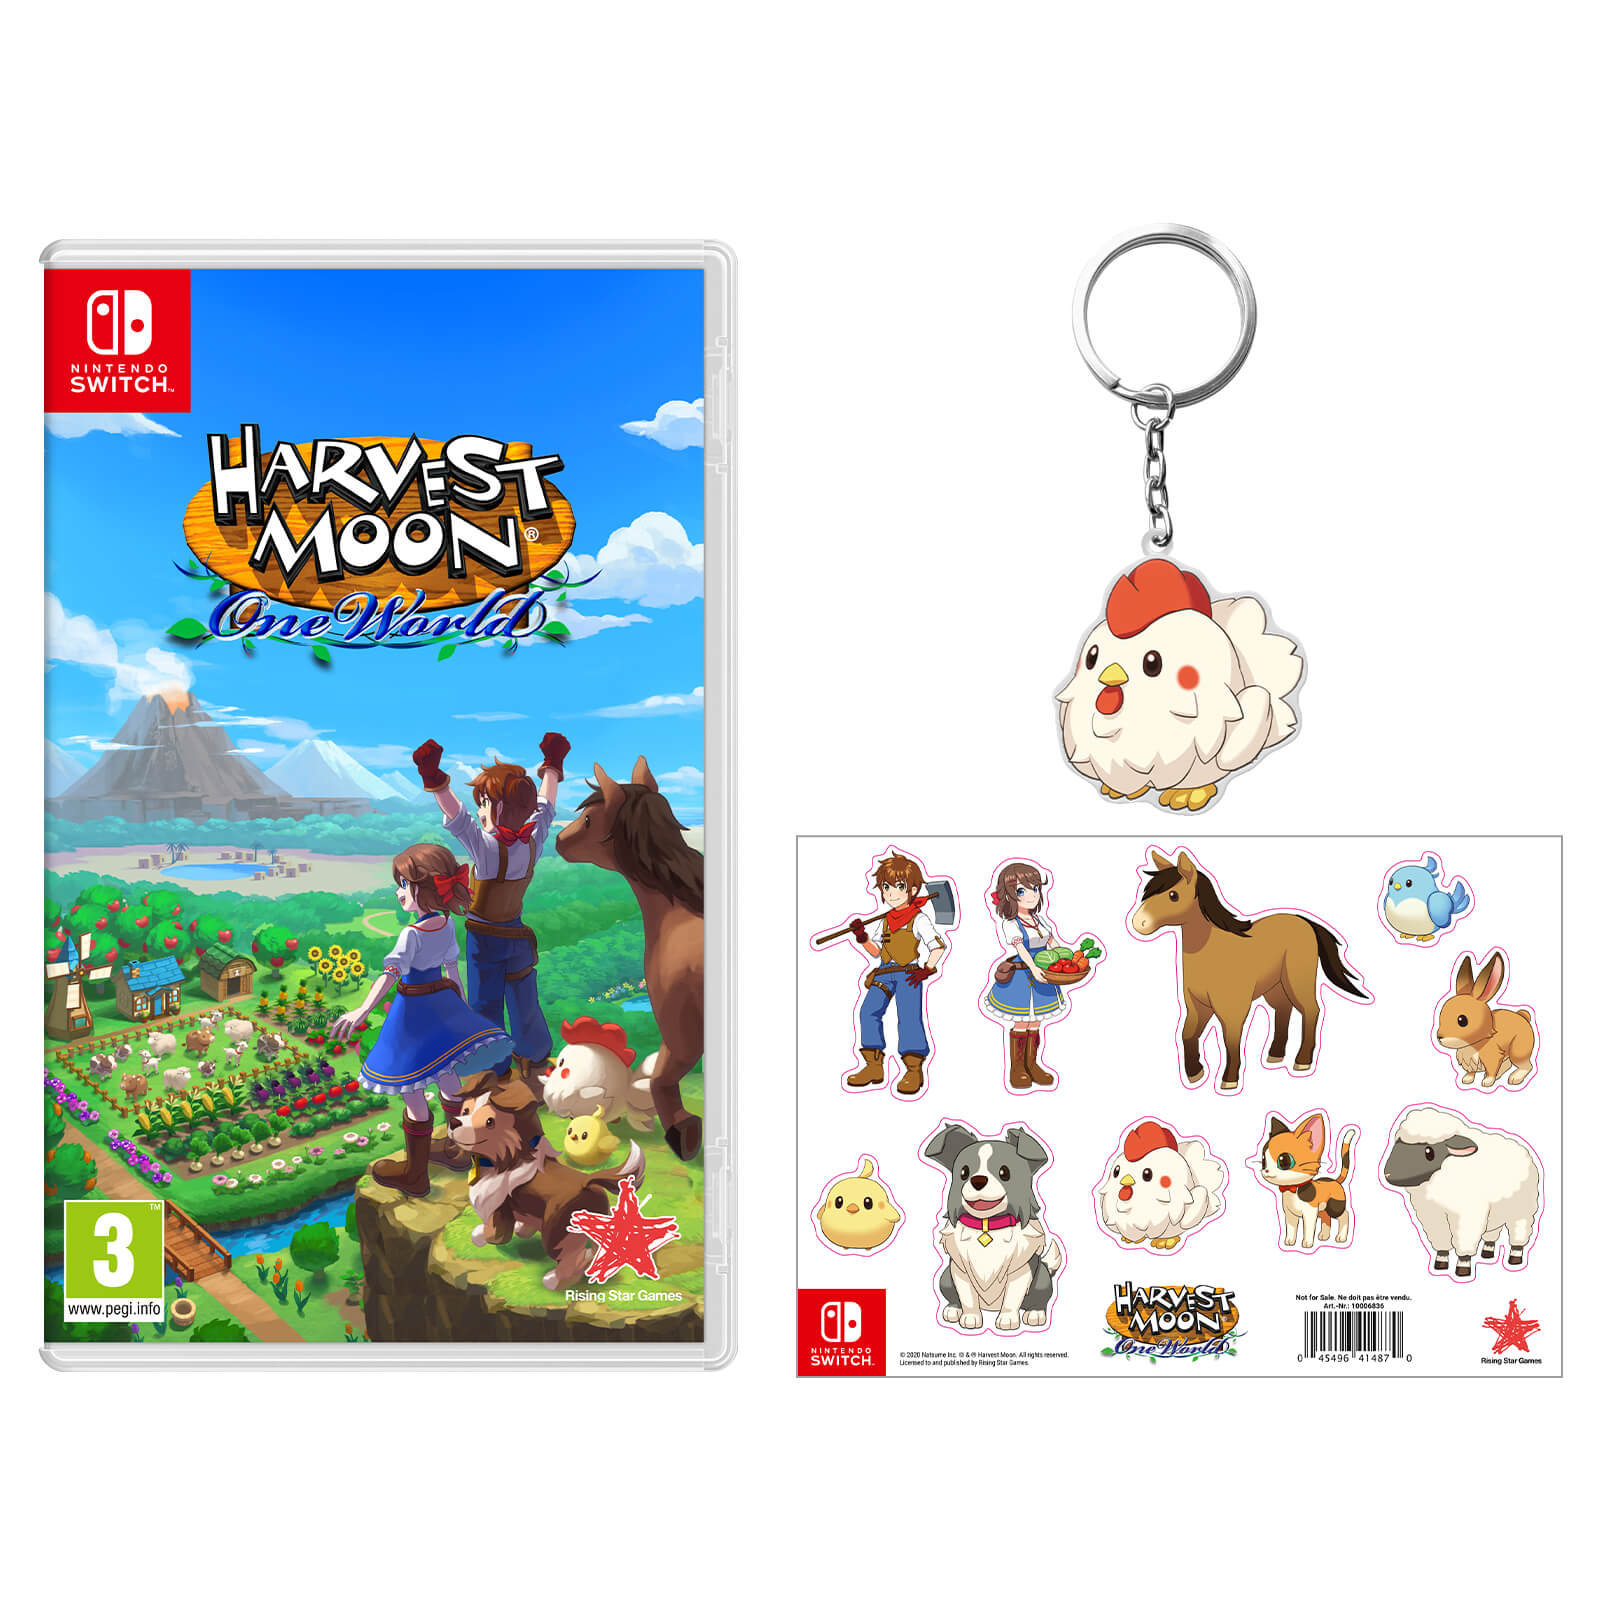 get keyring on Official sticker Harvest chicken a Moon: Nintendo UK Store, the and One sheet World Pre-order